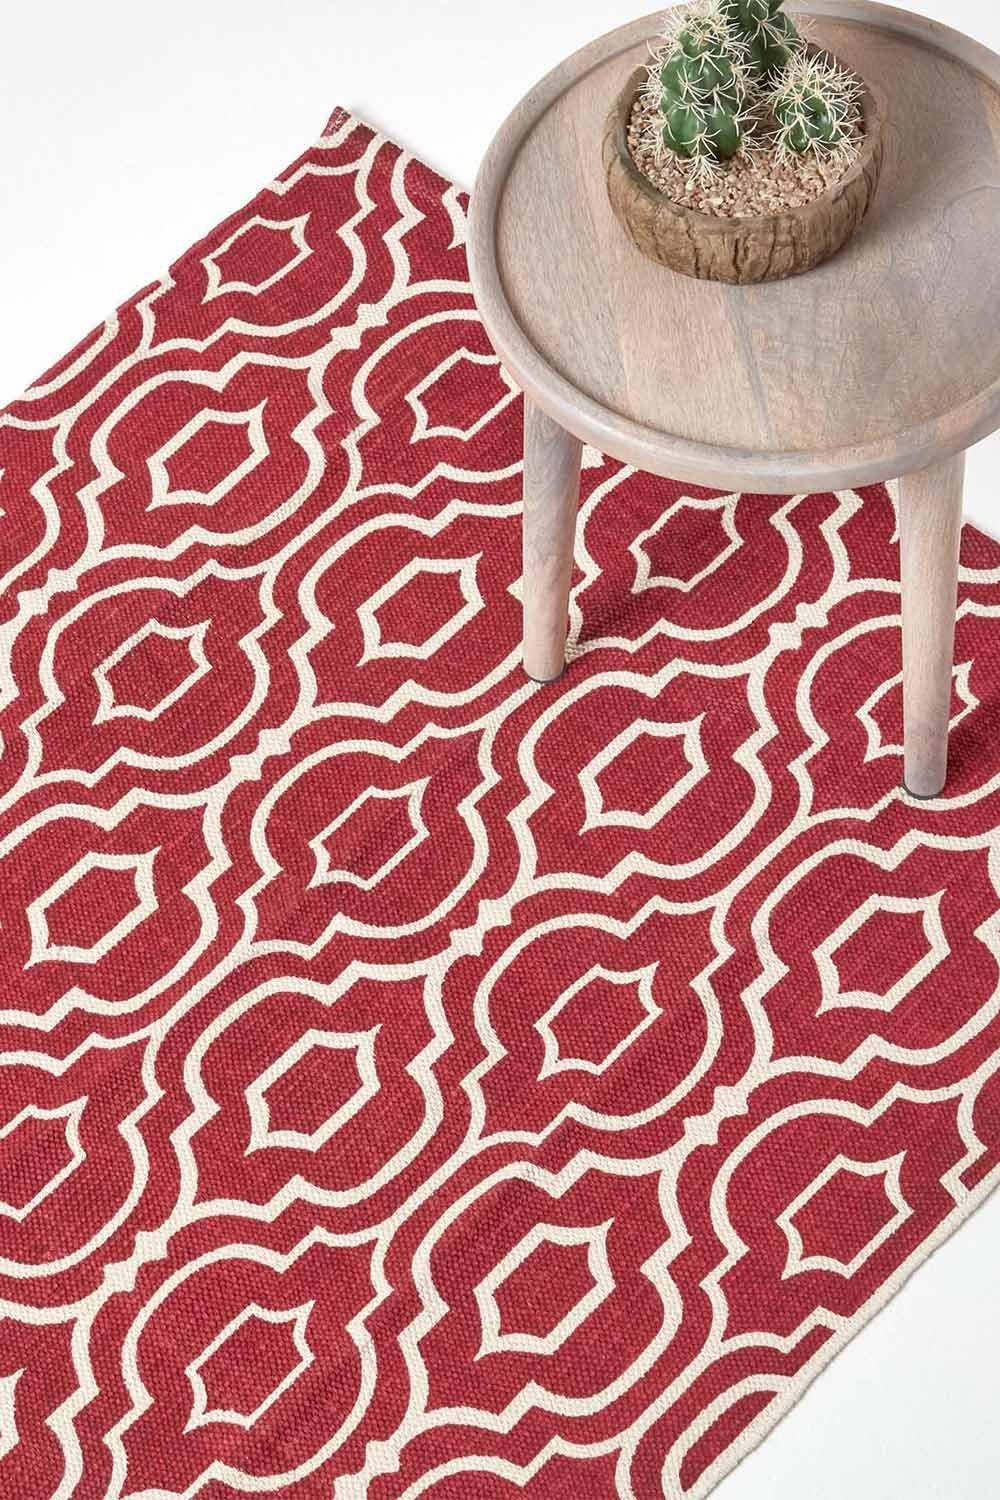 Riga 100% Cotton Printed Patterned Rug